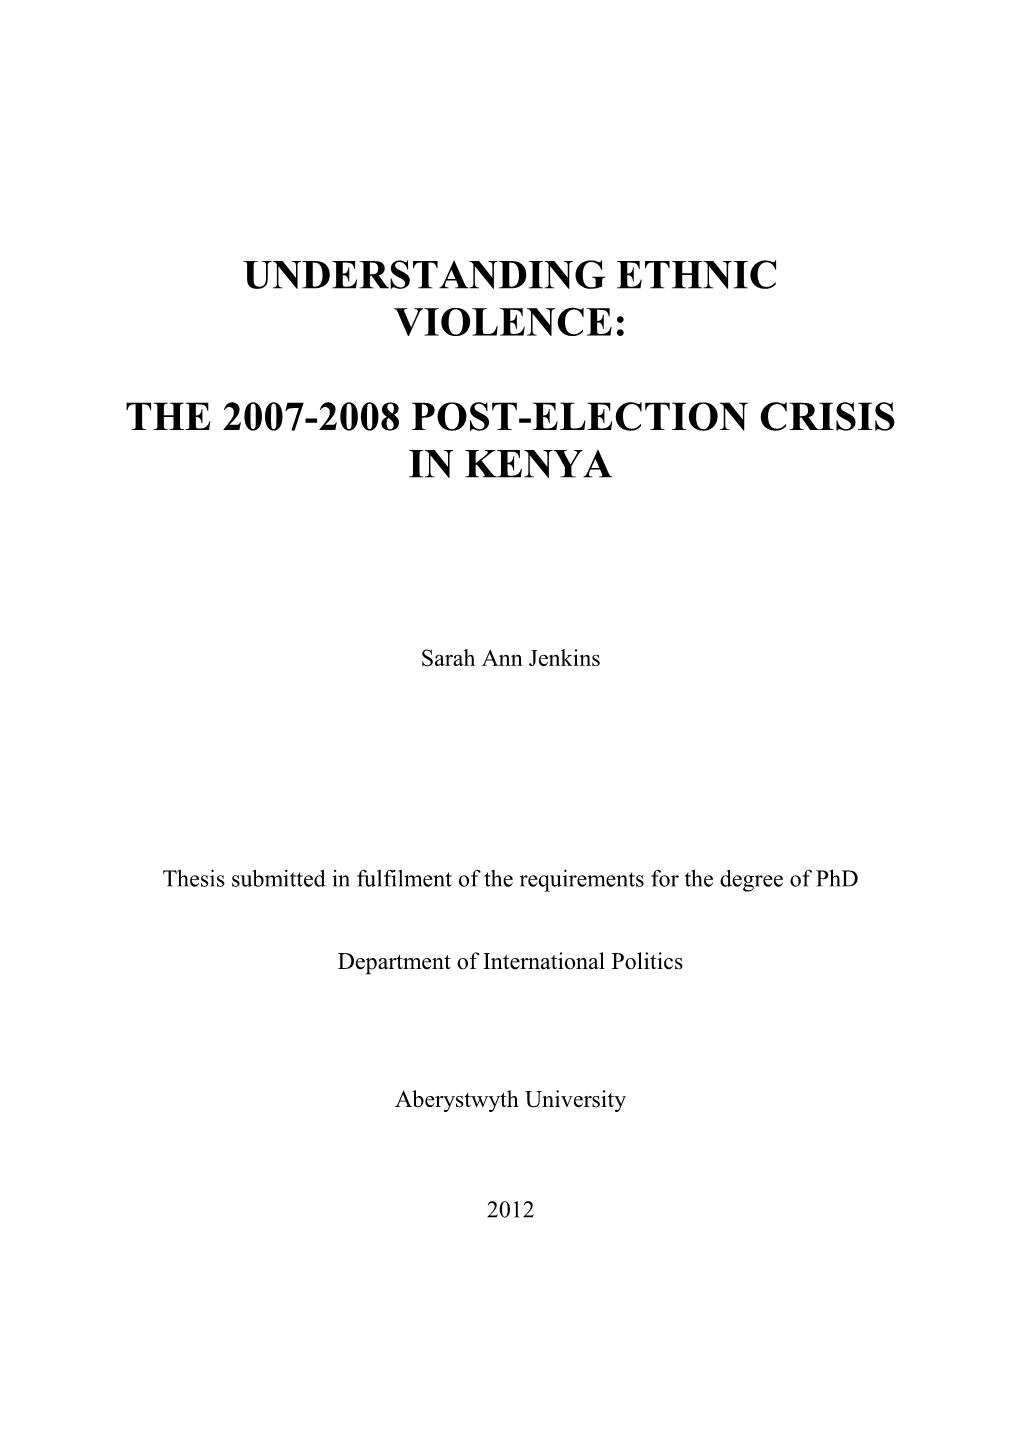 Understanding Ethnic Violence: the 2007-2008 Post-Election